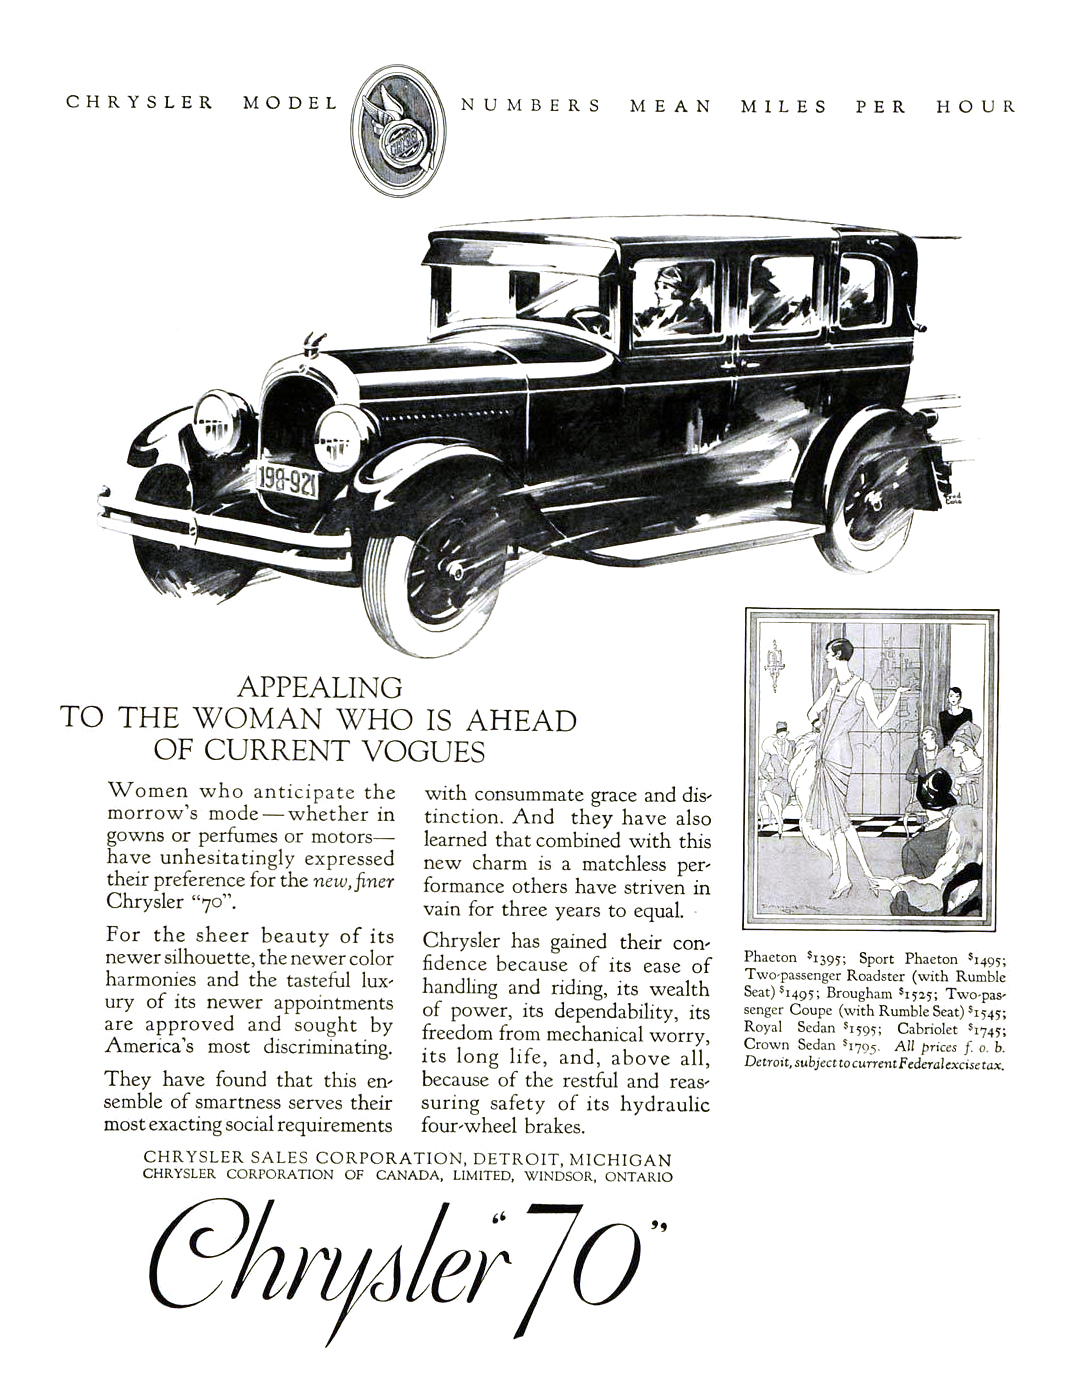 Chrysler "70" Ad (February, 1927) - Illustrated by Fred Cole and Edwin Dahlberg